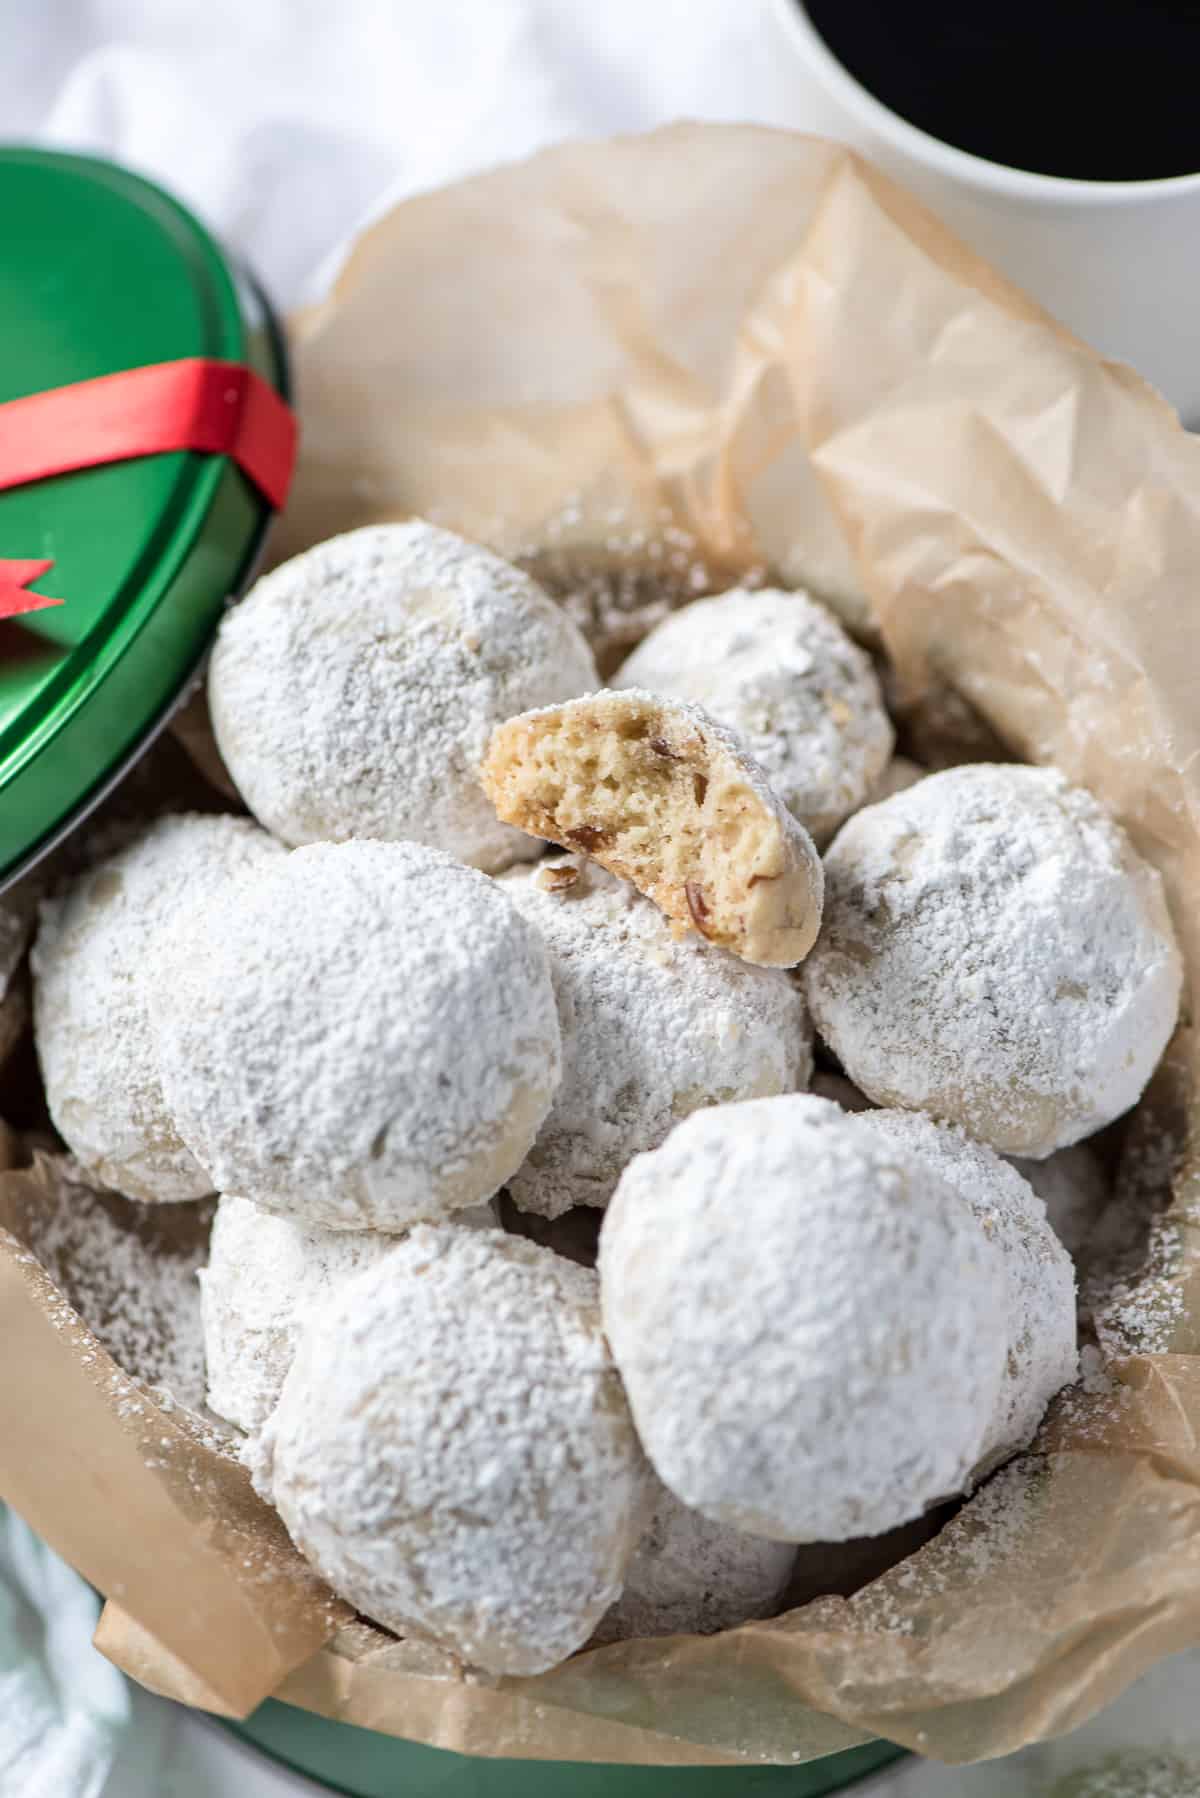 A pile of powdered sugar dusted Pecan Sandies in a green cookie tin with a bite missing from the cookie on top.